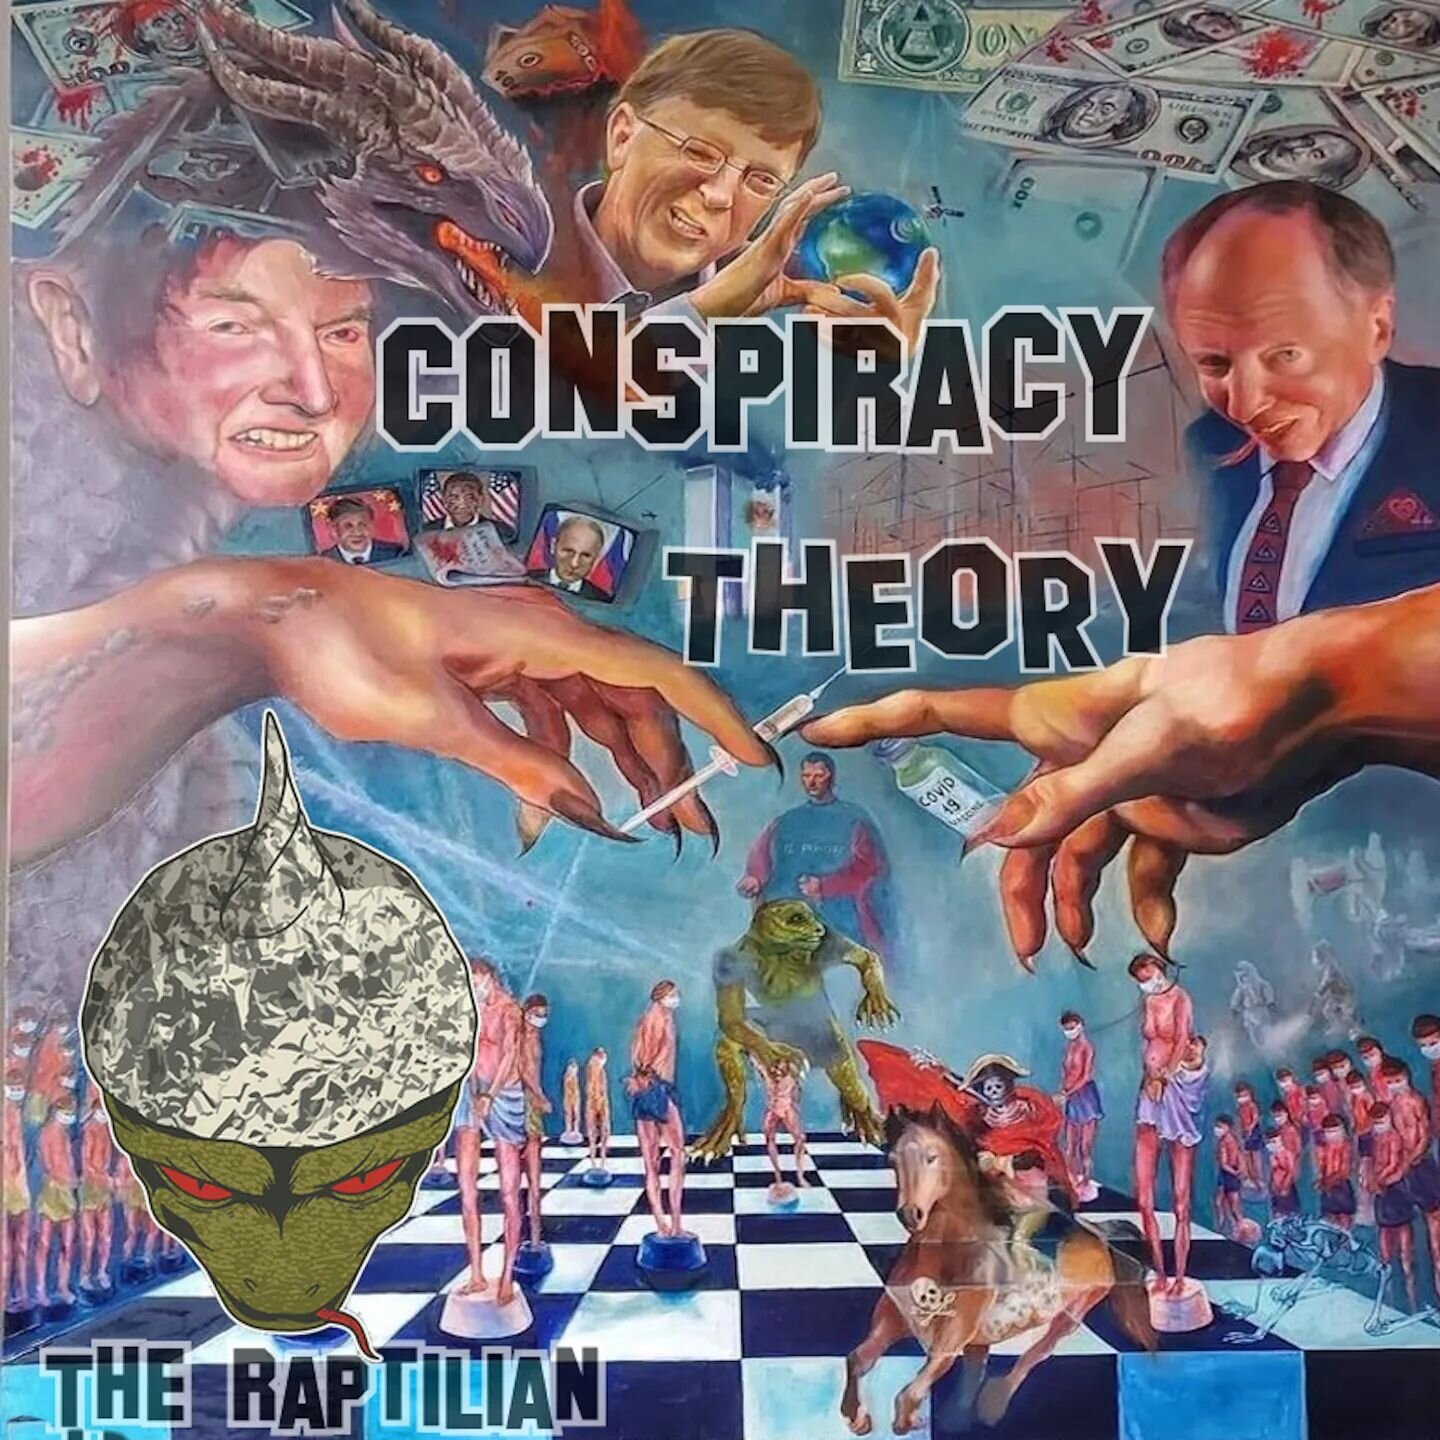 CONSPIRACY.. Check out the latest song from @theraptilianx How deep does the rabbit hole go? 
🕳 🐇 Go Subscribe on any music platform.
.
.
.
.
.
.
.
.
.
.
.
#Strangebrewpodcast #theraptilian #conspiracy #conspiracytheories #hiphop #conspiracytheory 